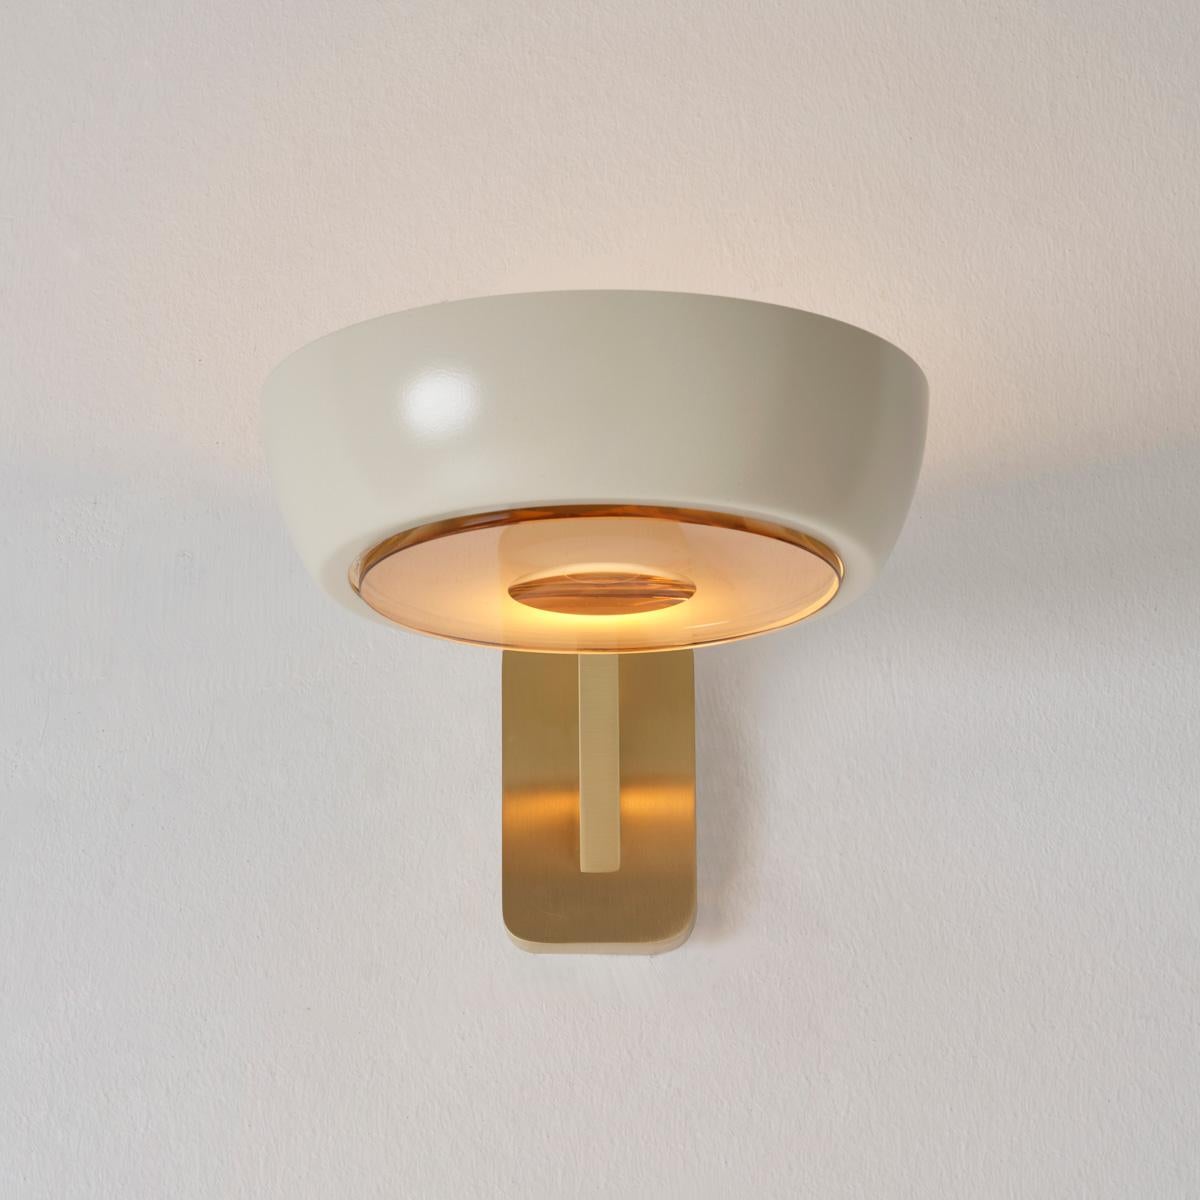 Italian Rose Single Wall Light by Gaspare Asaro. For Sale